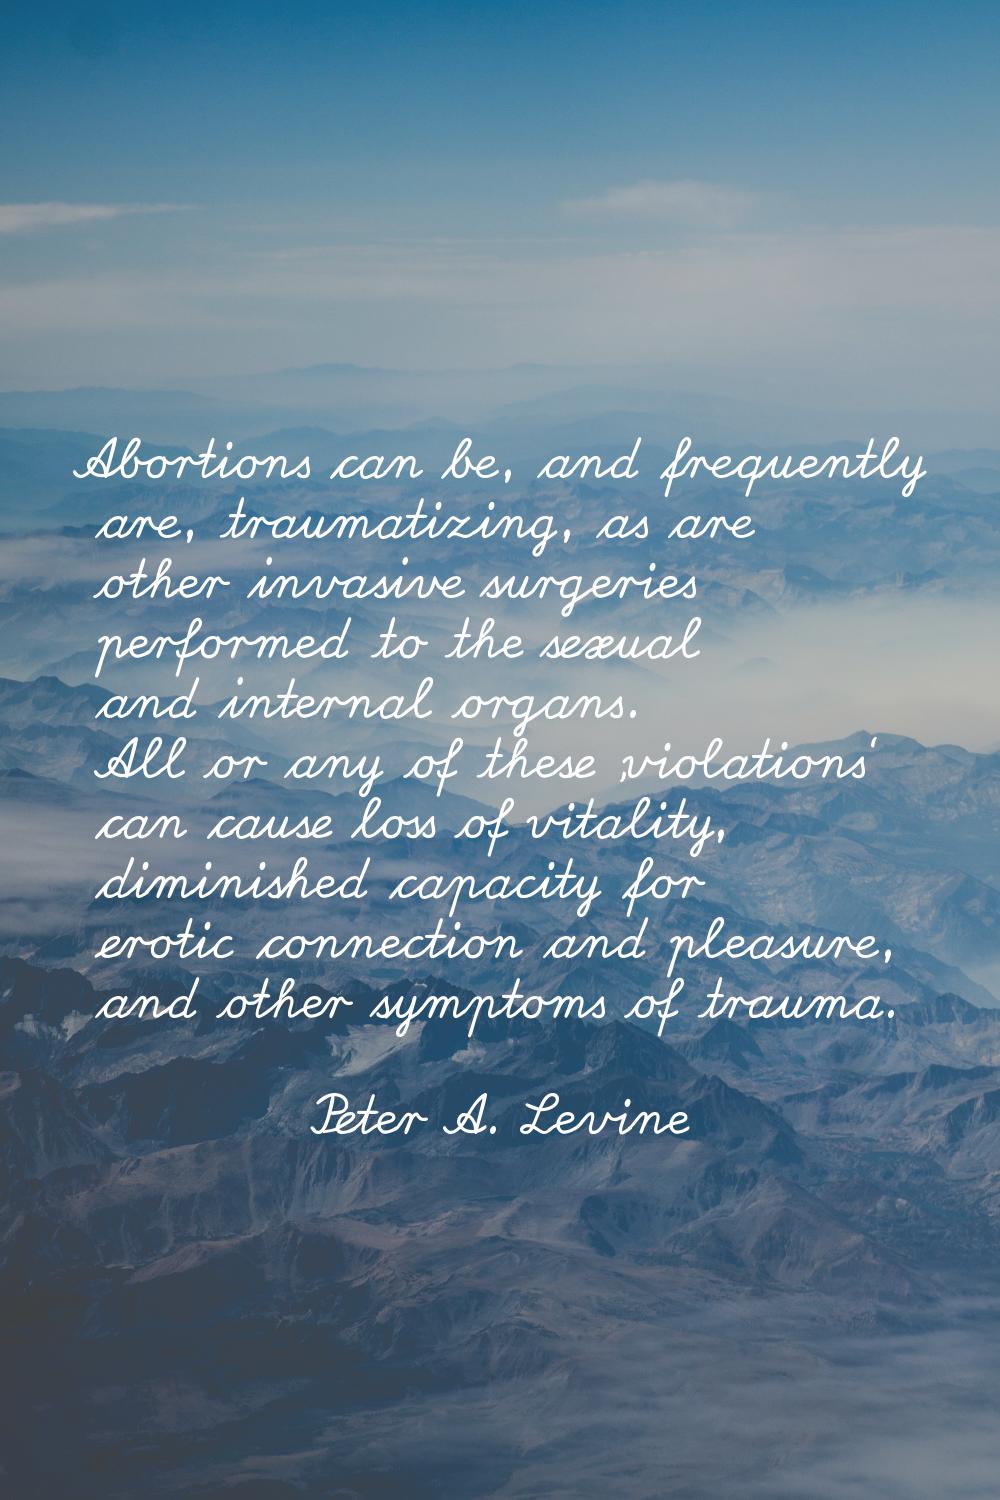 Abortions can be, and frequently are, traumatizing, as are other invasive surgeries performed to th